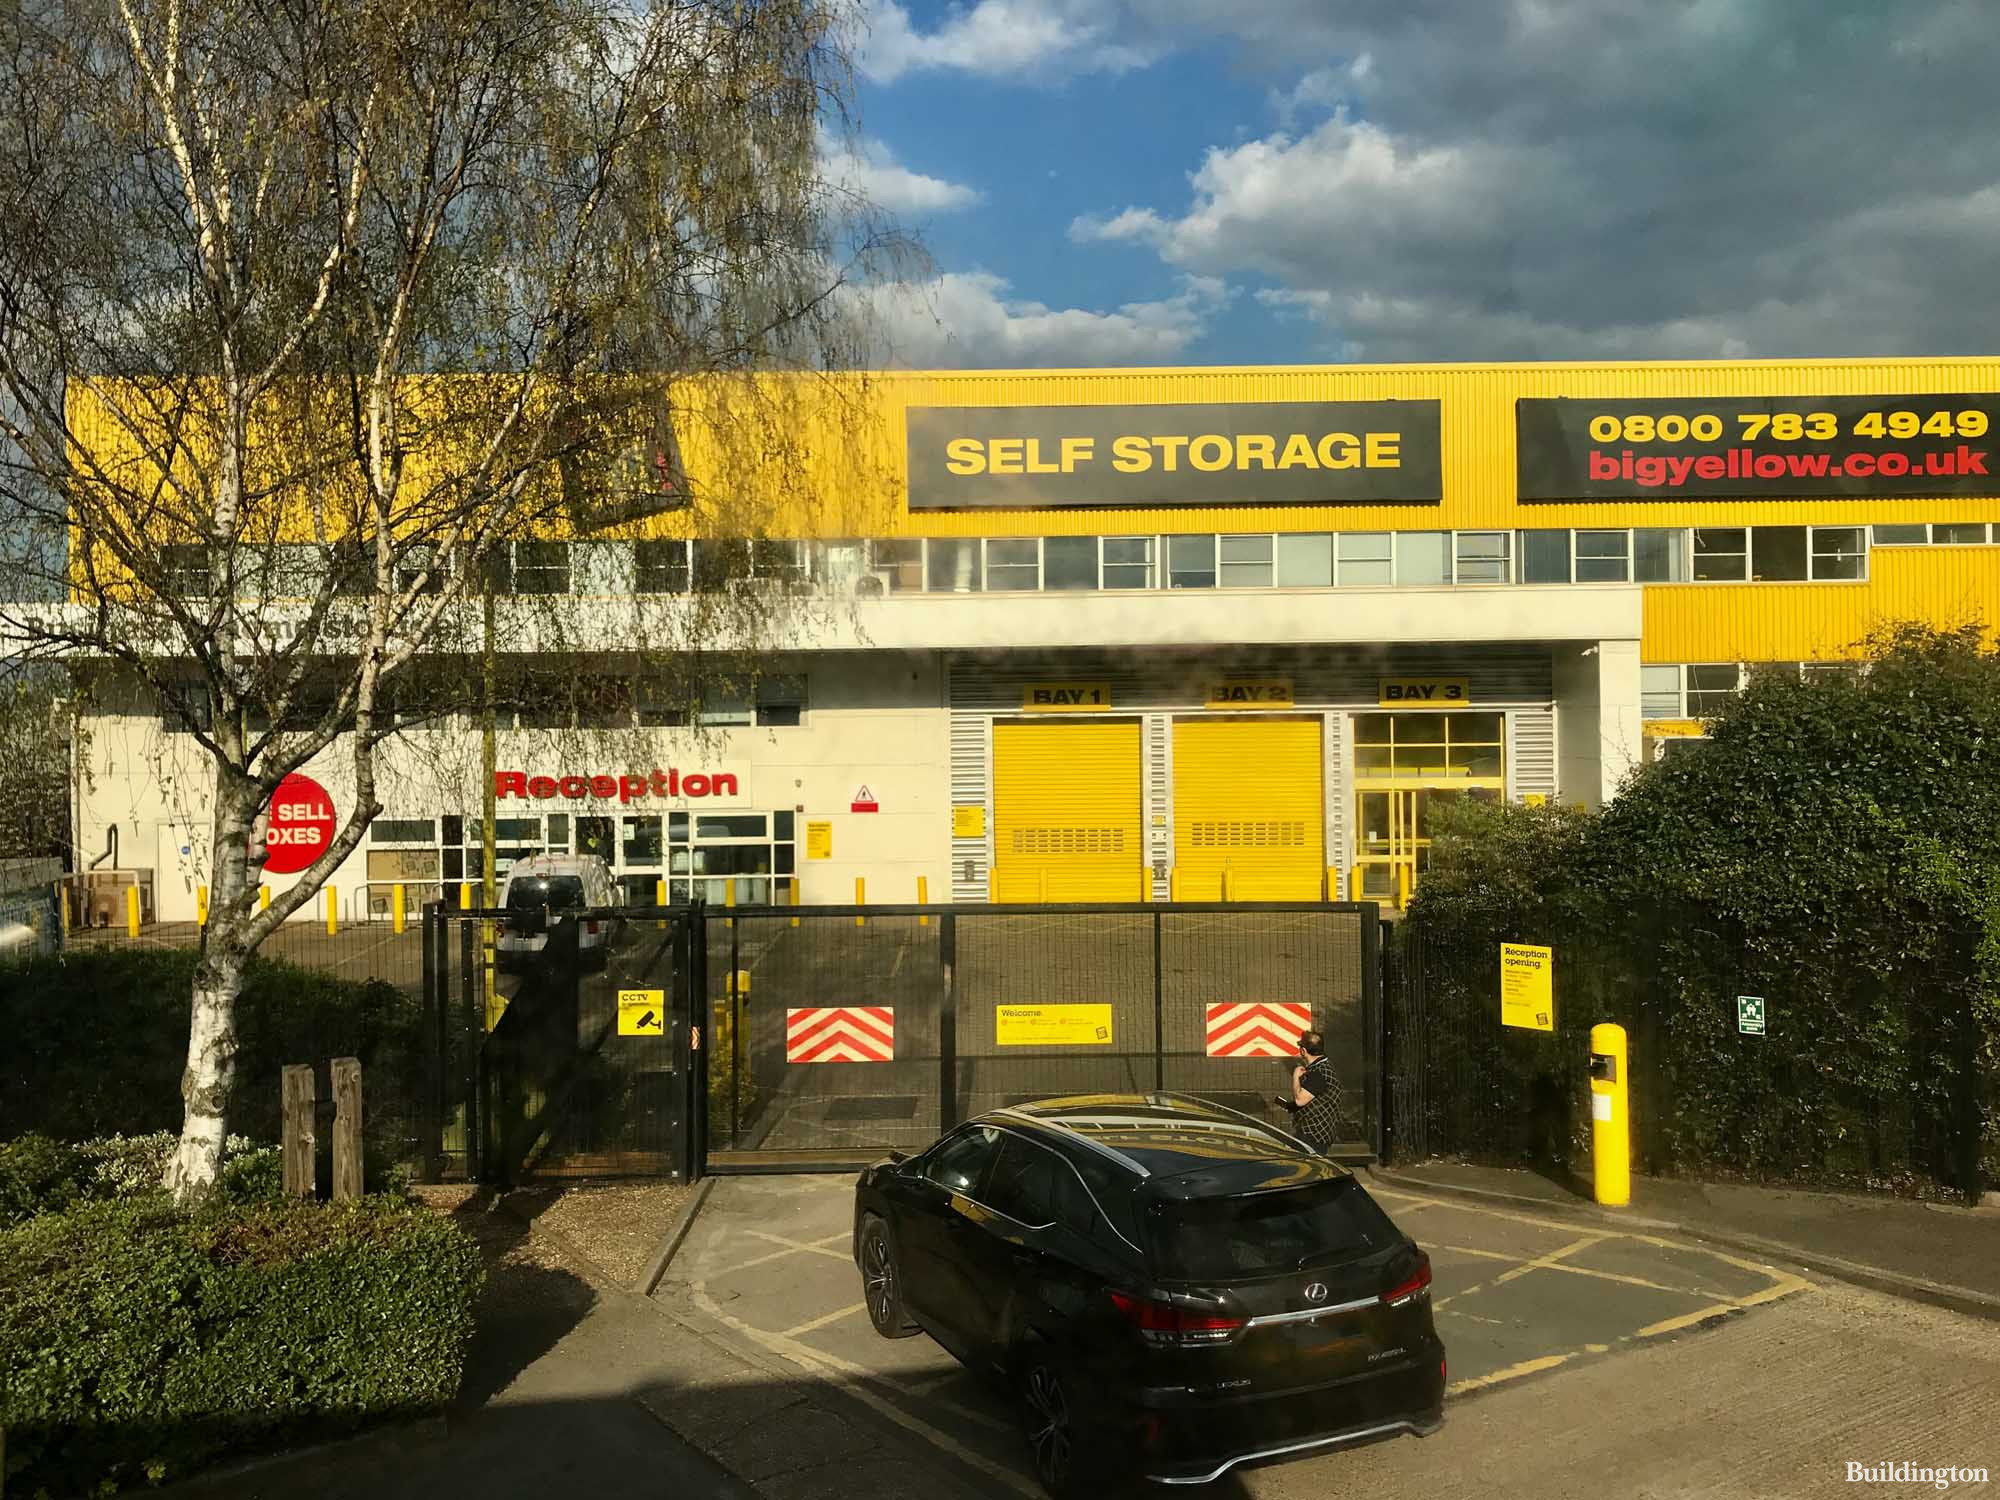 At the gates to the Big Yellow Self Storage Staples Corner building, 1000 North Circular Road, in London NW2.